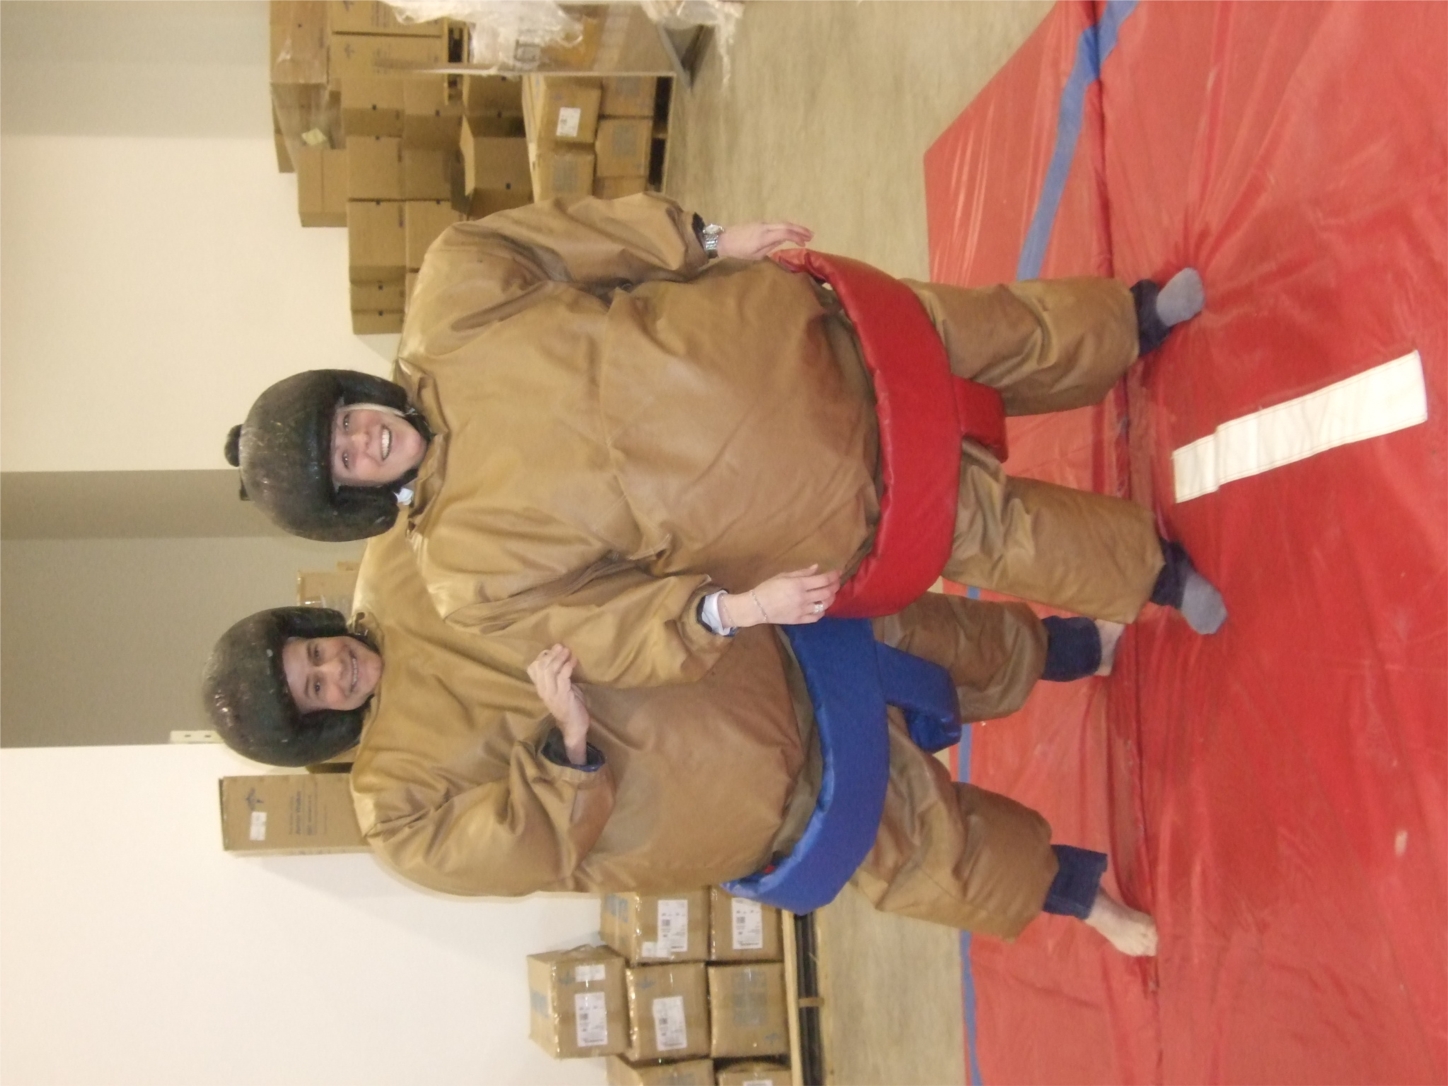 Sumo Wrestling for charity